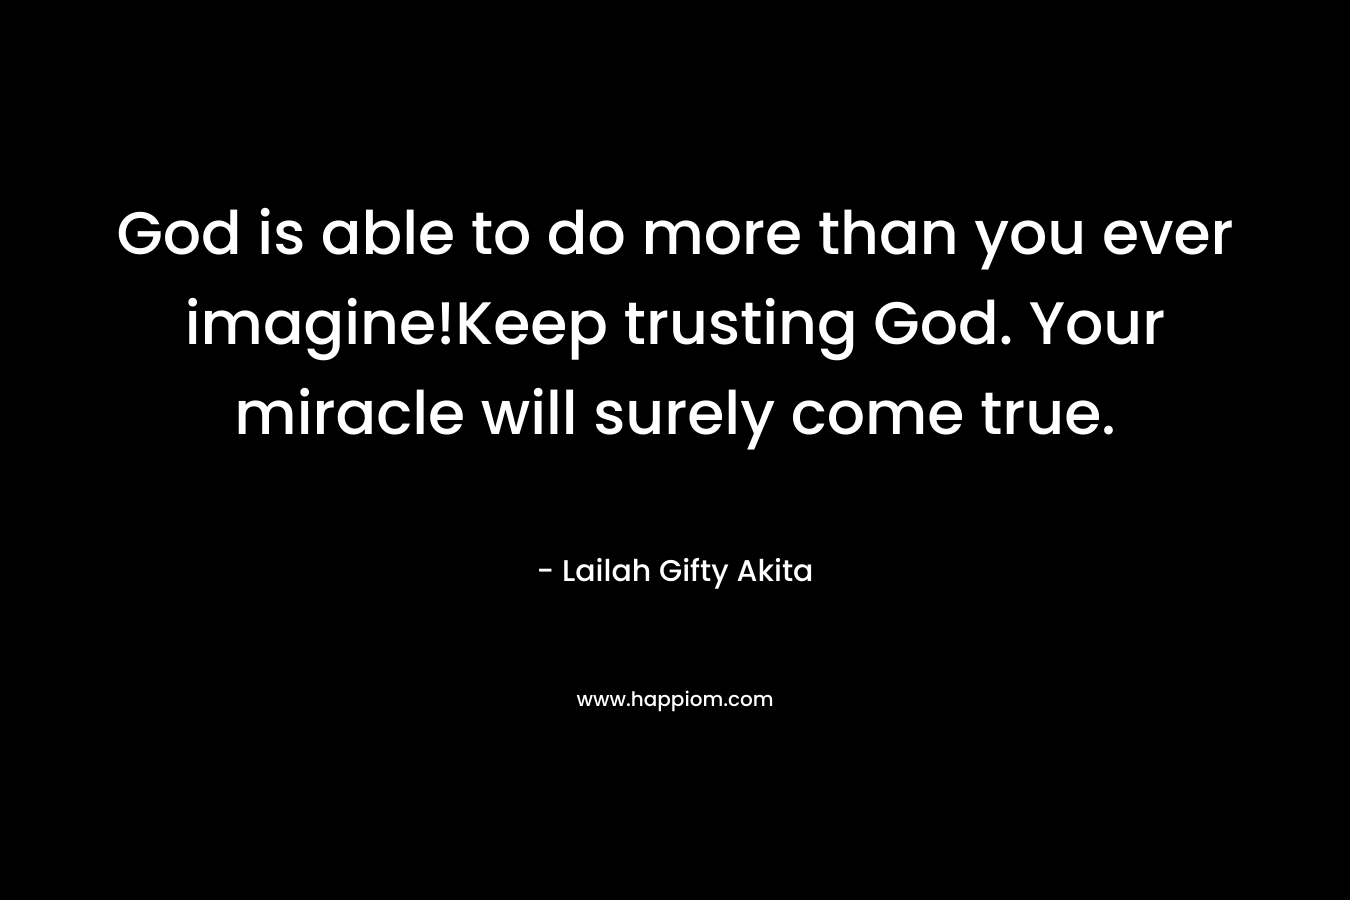 God is able to do more than you ever imagine!Keep trusting God. Your miracle will surely come true.